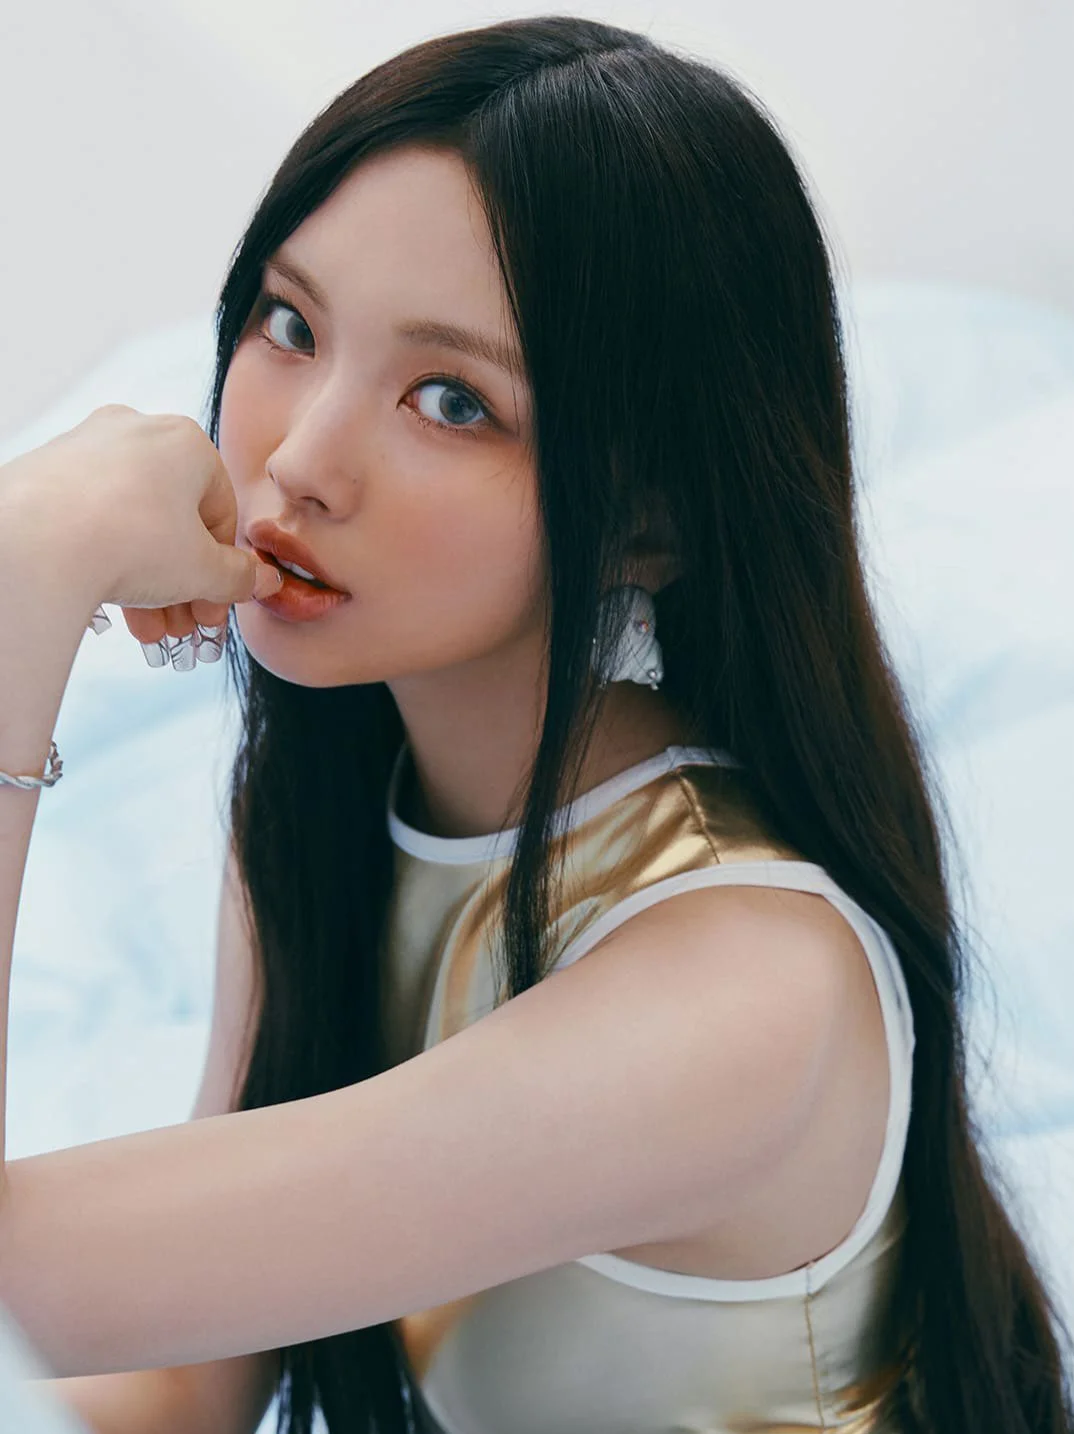 Fans Can't Help But Rave About NewJeans Hyein's Vogue Pictorial